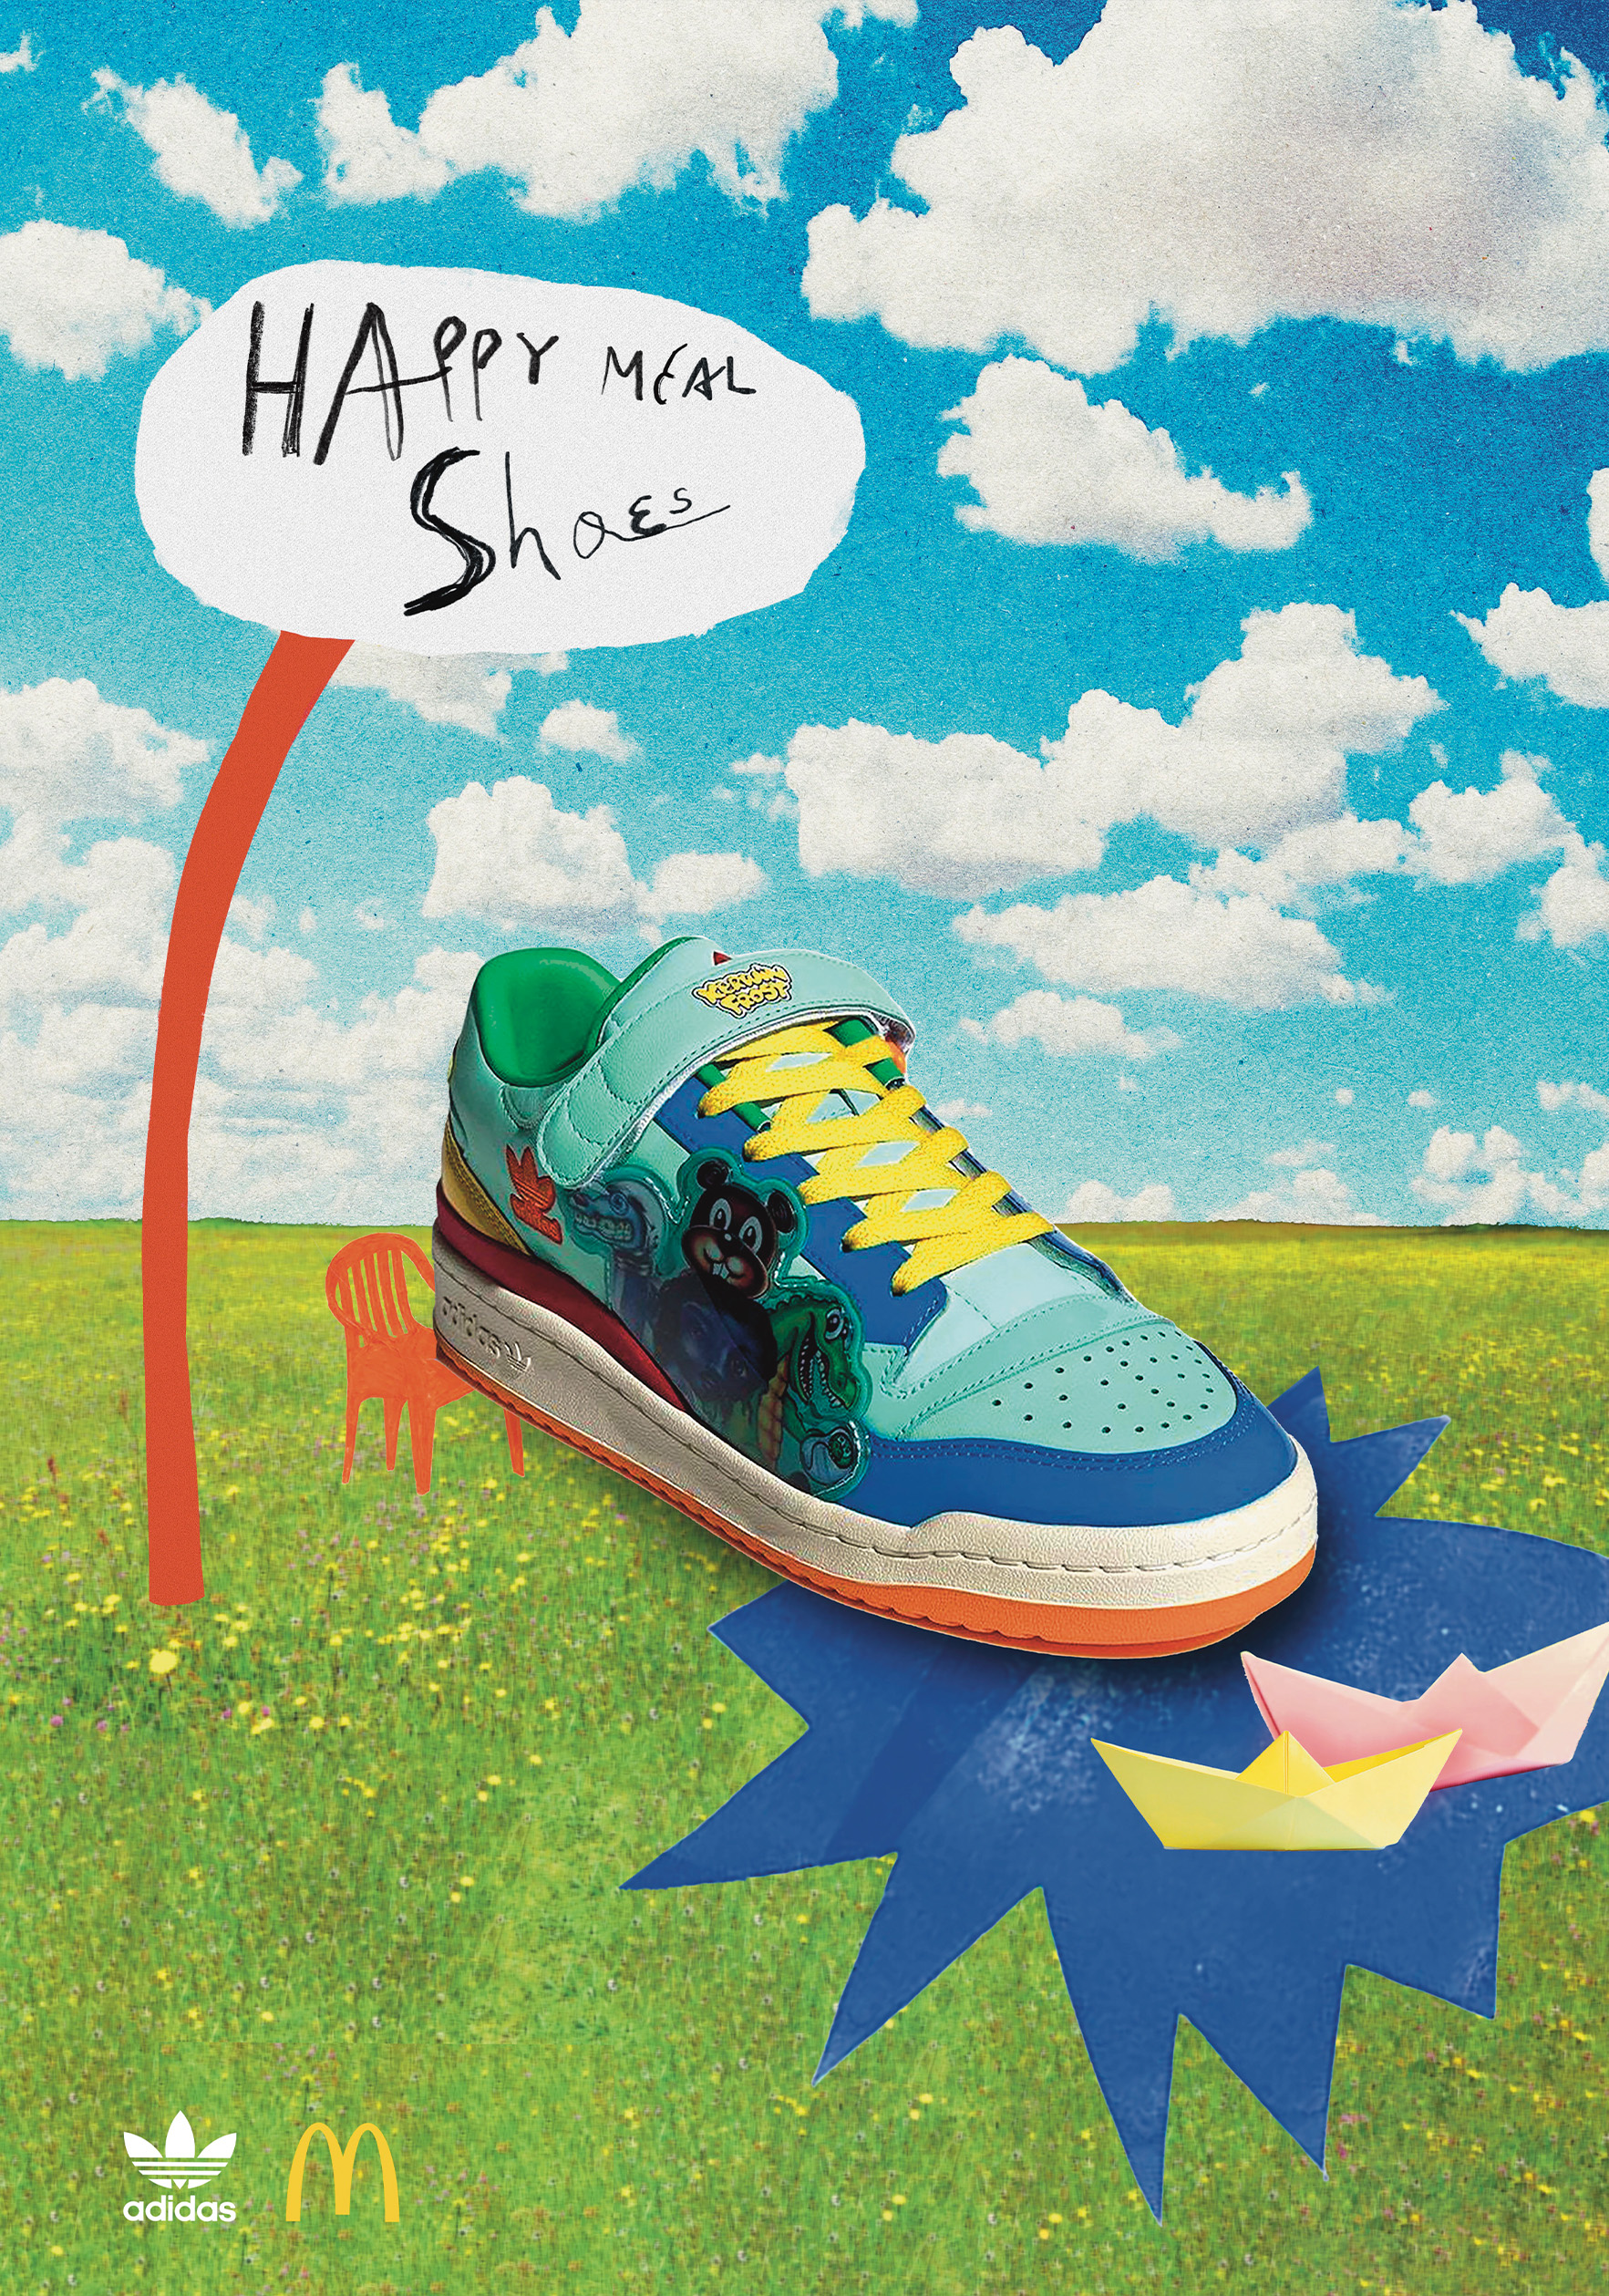 FEATURED IMAGE1 Happy meal shoes Andrea novicevic